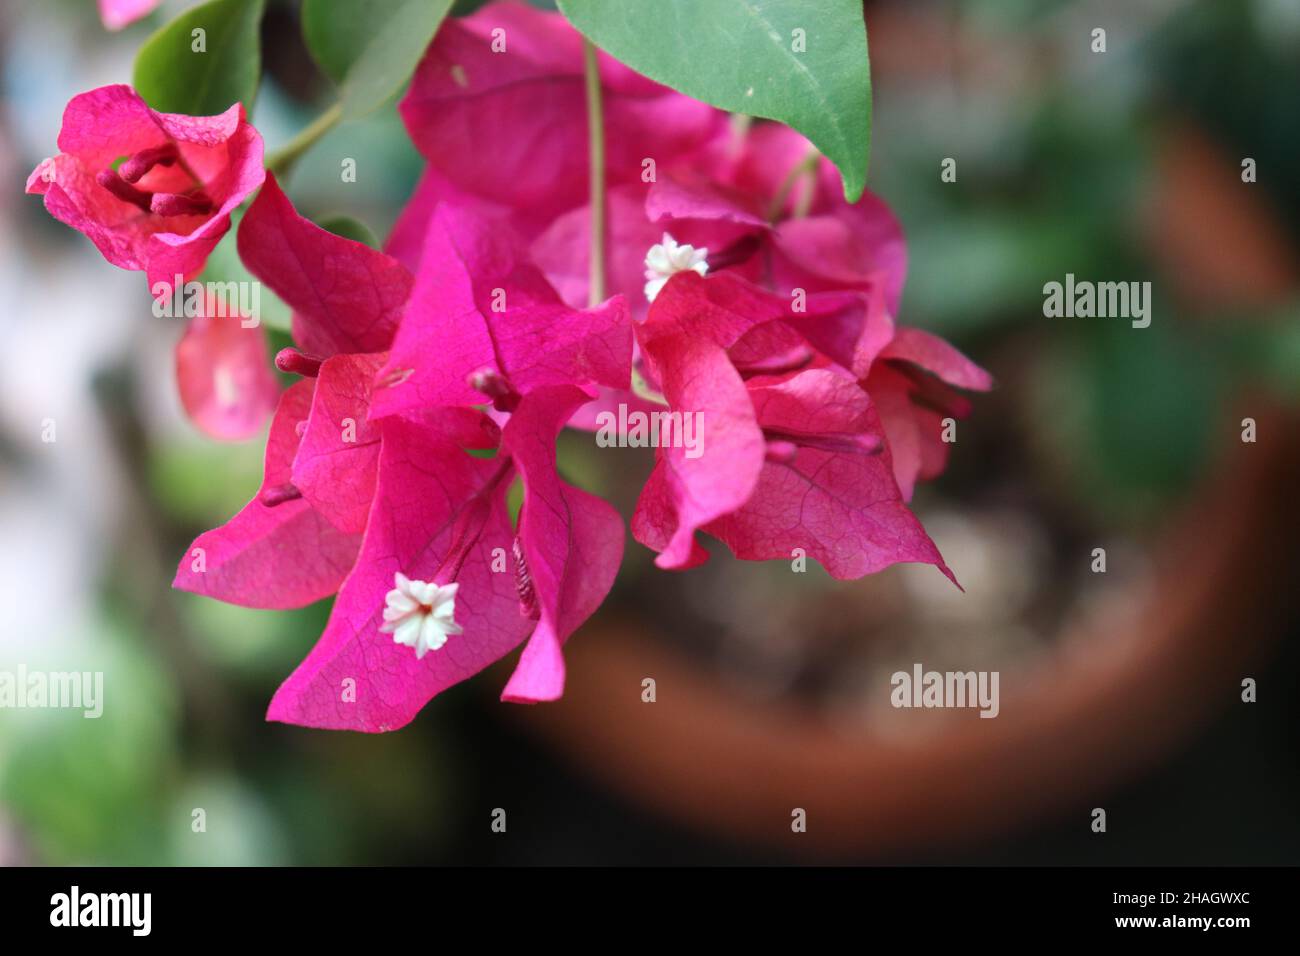 Pink bougainvillea blooms/plant in a flower pot/apartment balcony garden Stock Photo